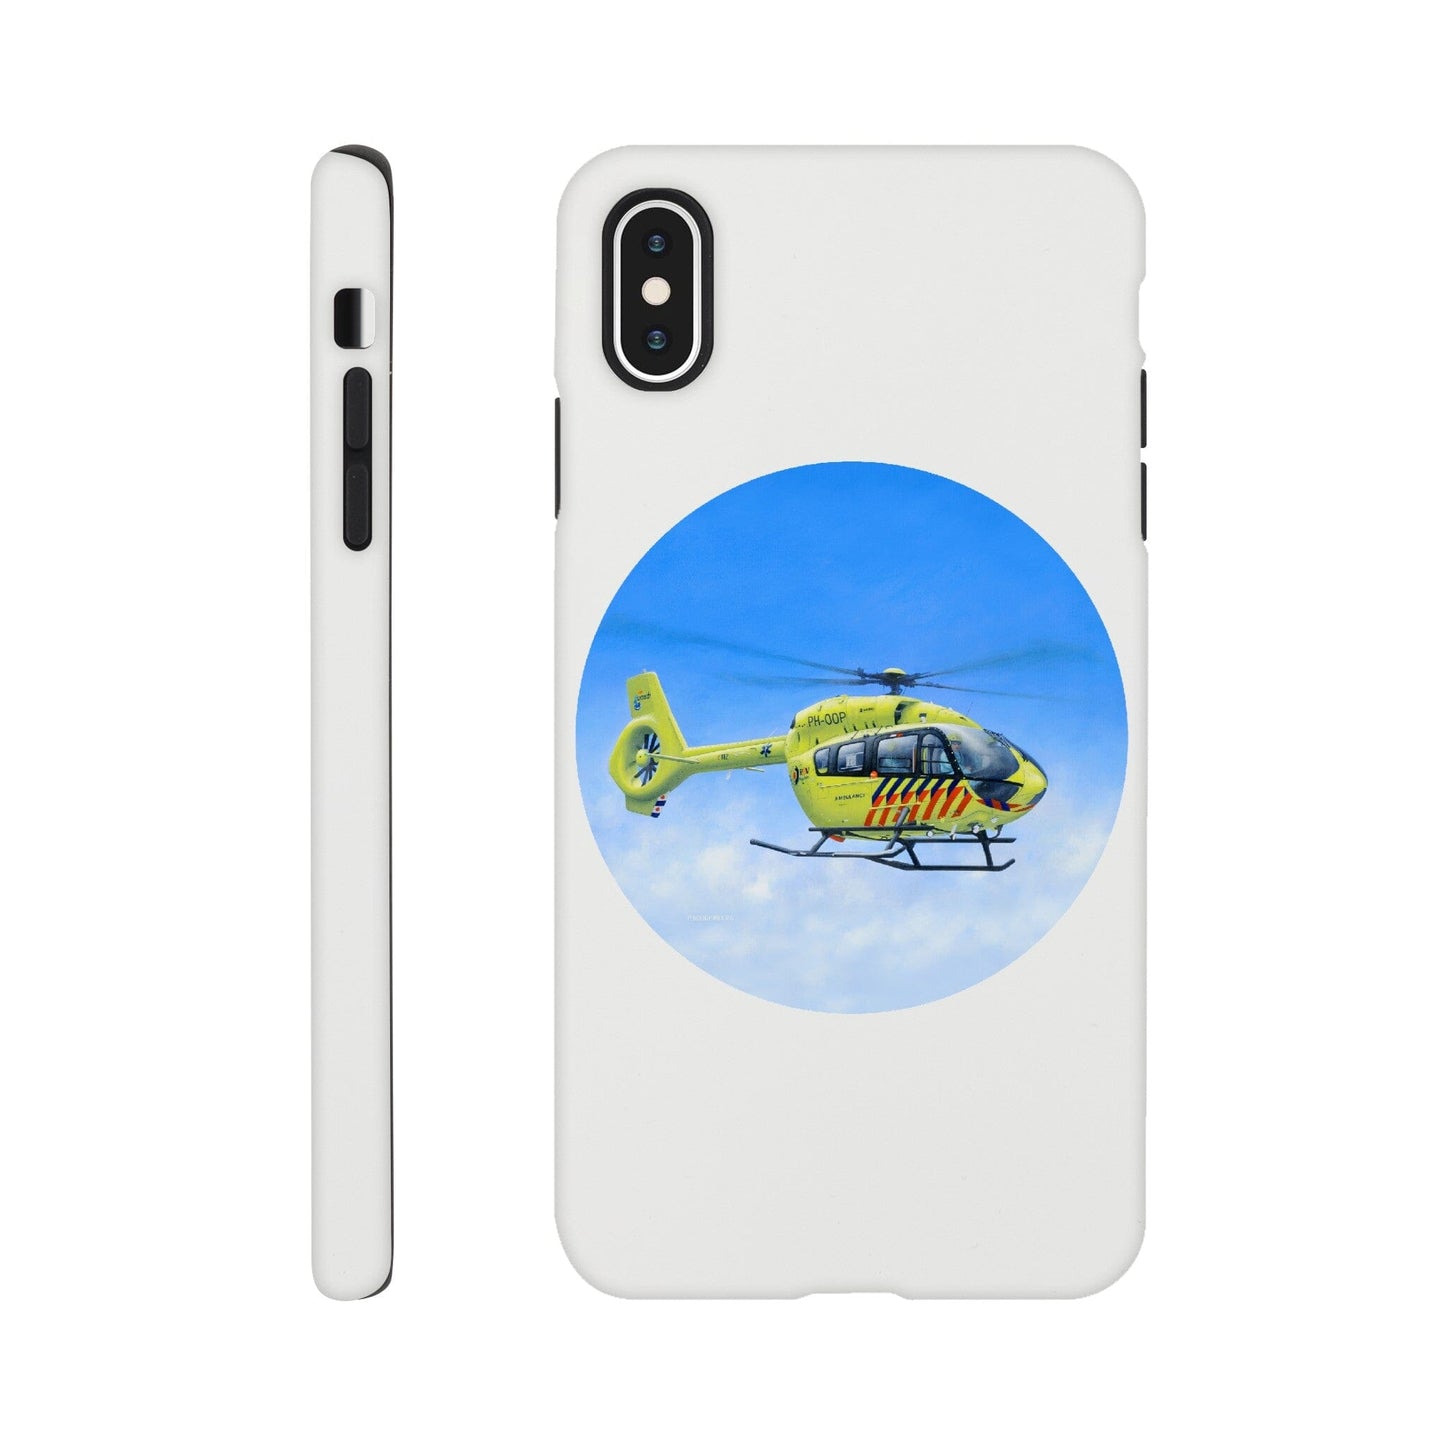 Peter Hoogenberg - Phone Case Tough - Ambulance Helicopter Wadden Islands Phone Case TP Aviation Art iPhone XS Max 